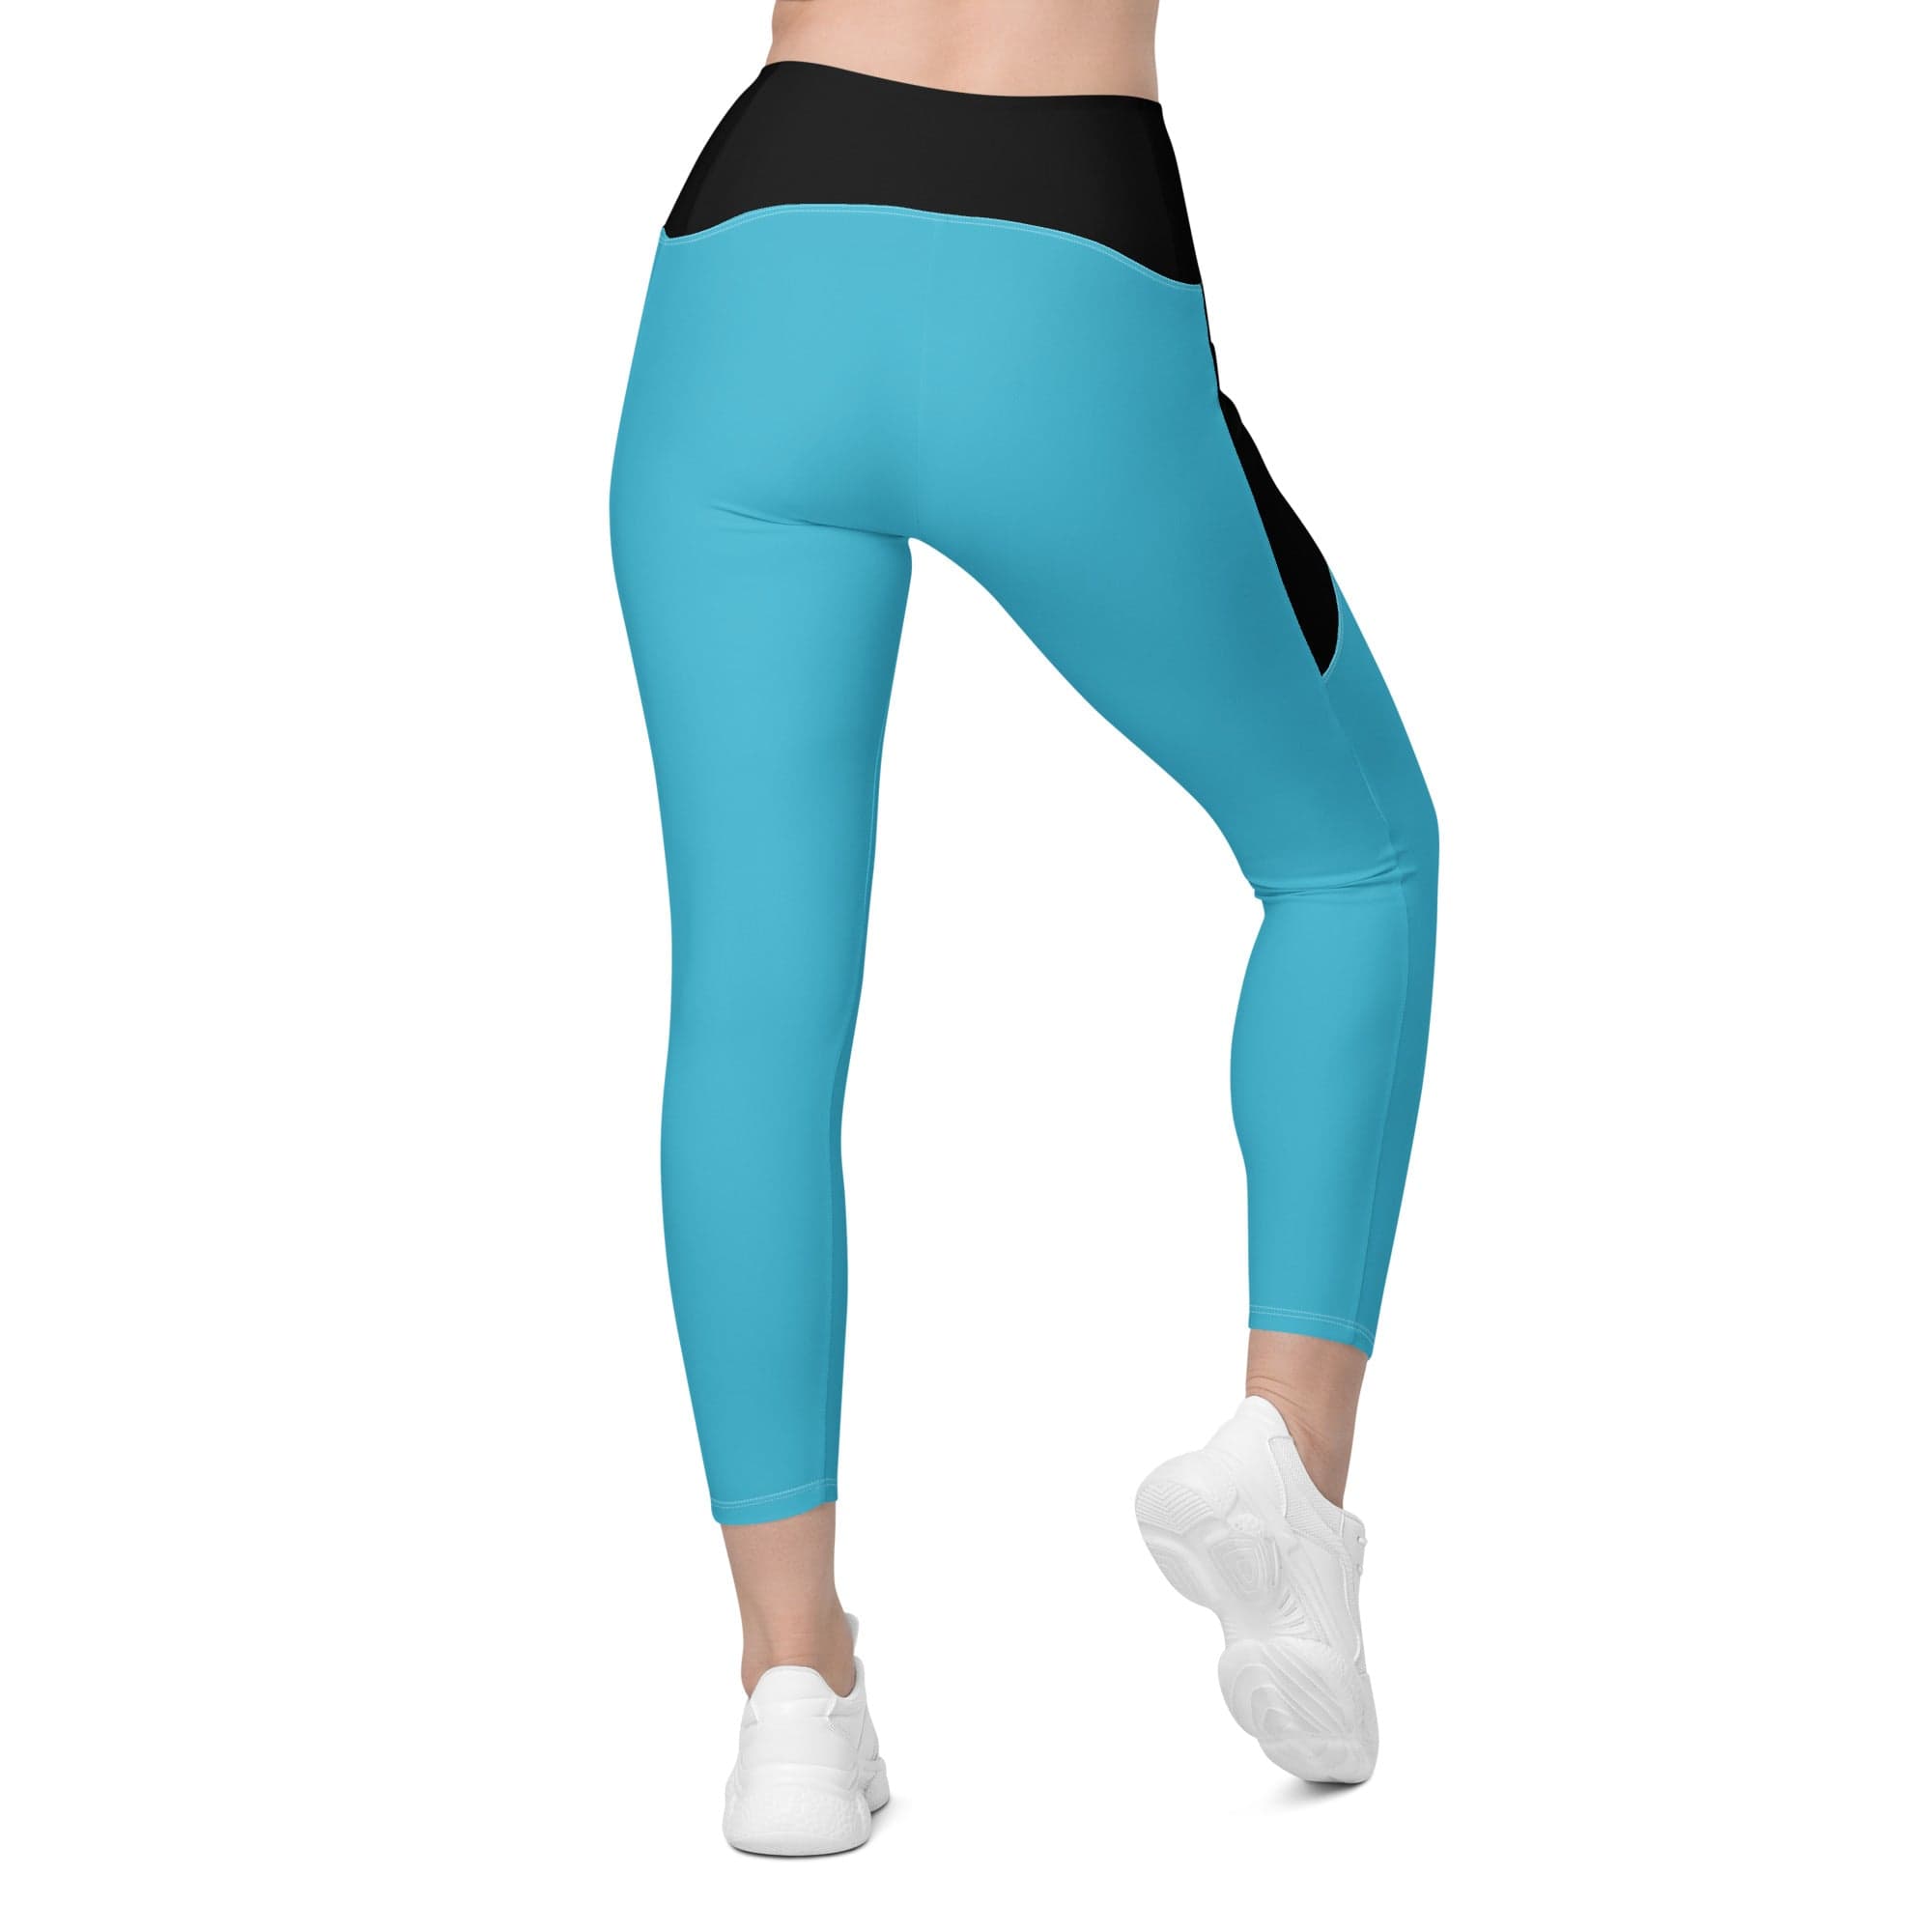 Fire Cornhole Leggings with pockets in light blue and black